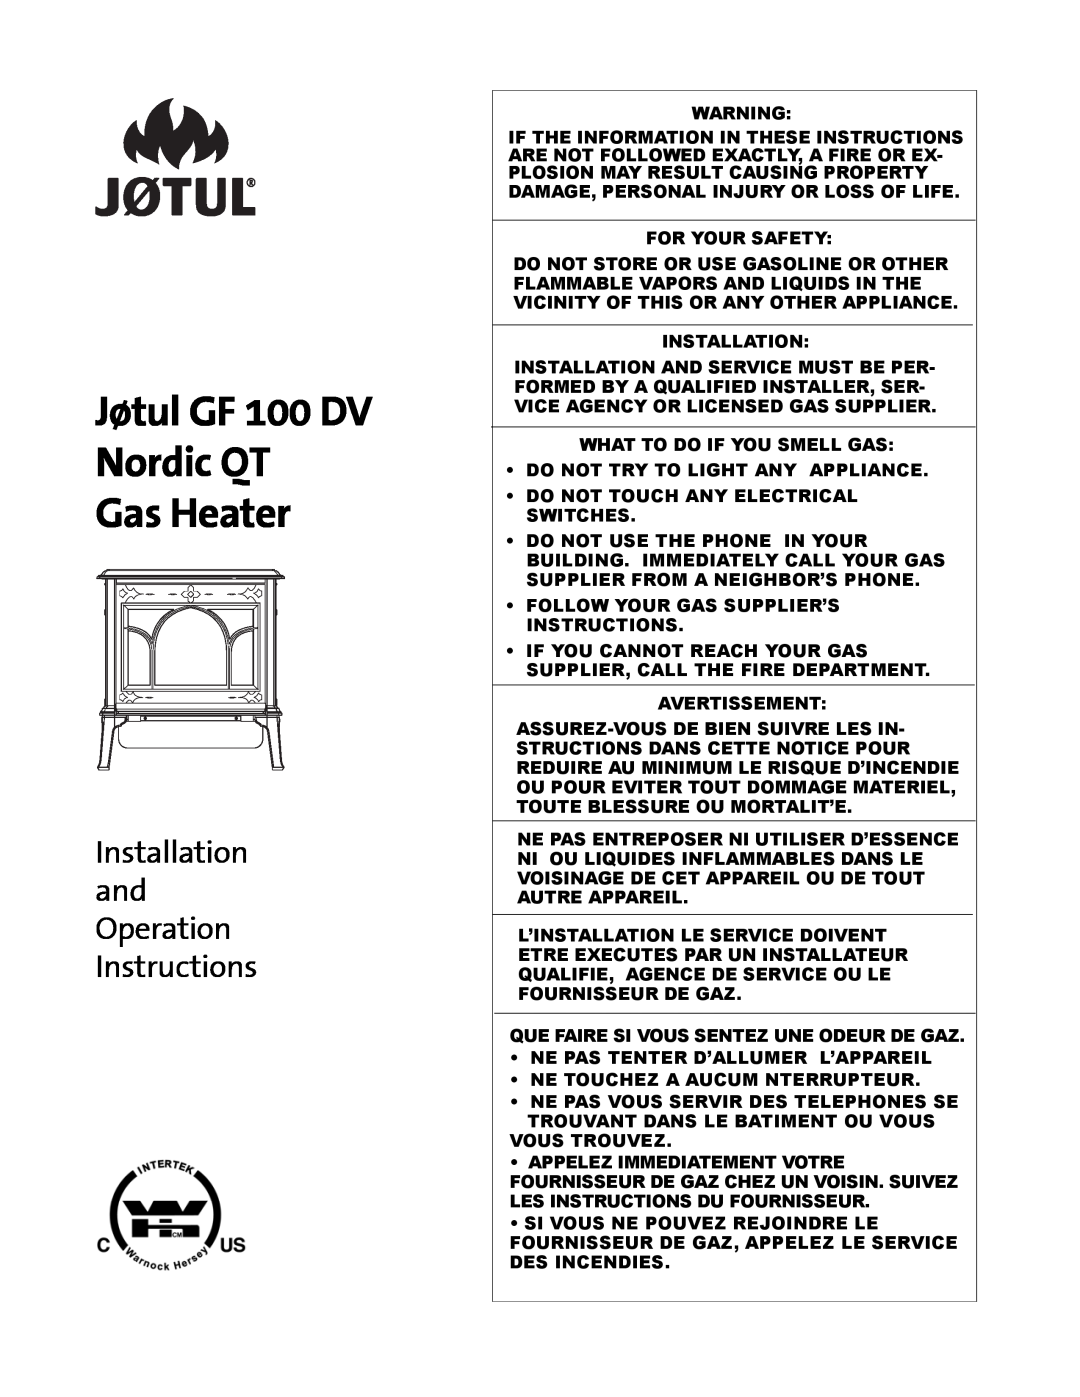 Jotul GF100 DV manual Jøtul GF 100 DV Nordic QT Gas Heater, Installation and Operation Instructions, For Your Safety 